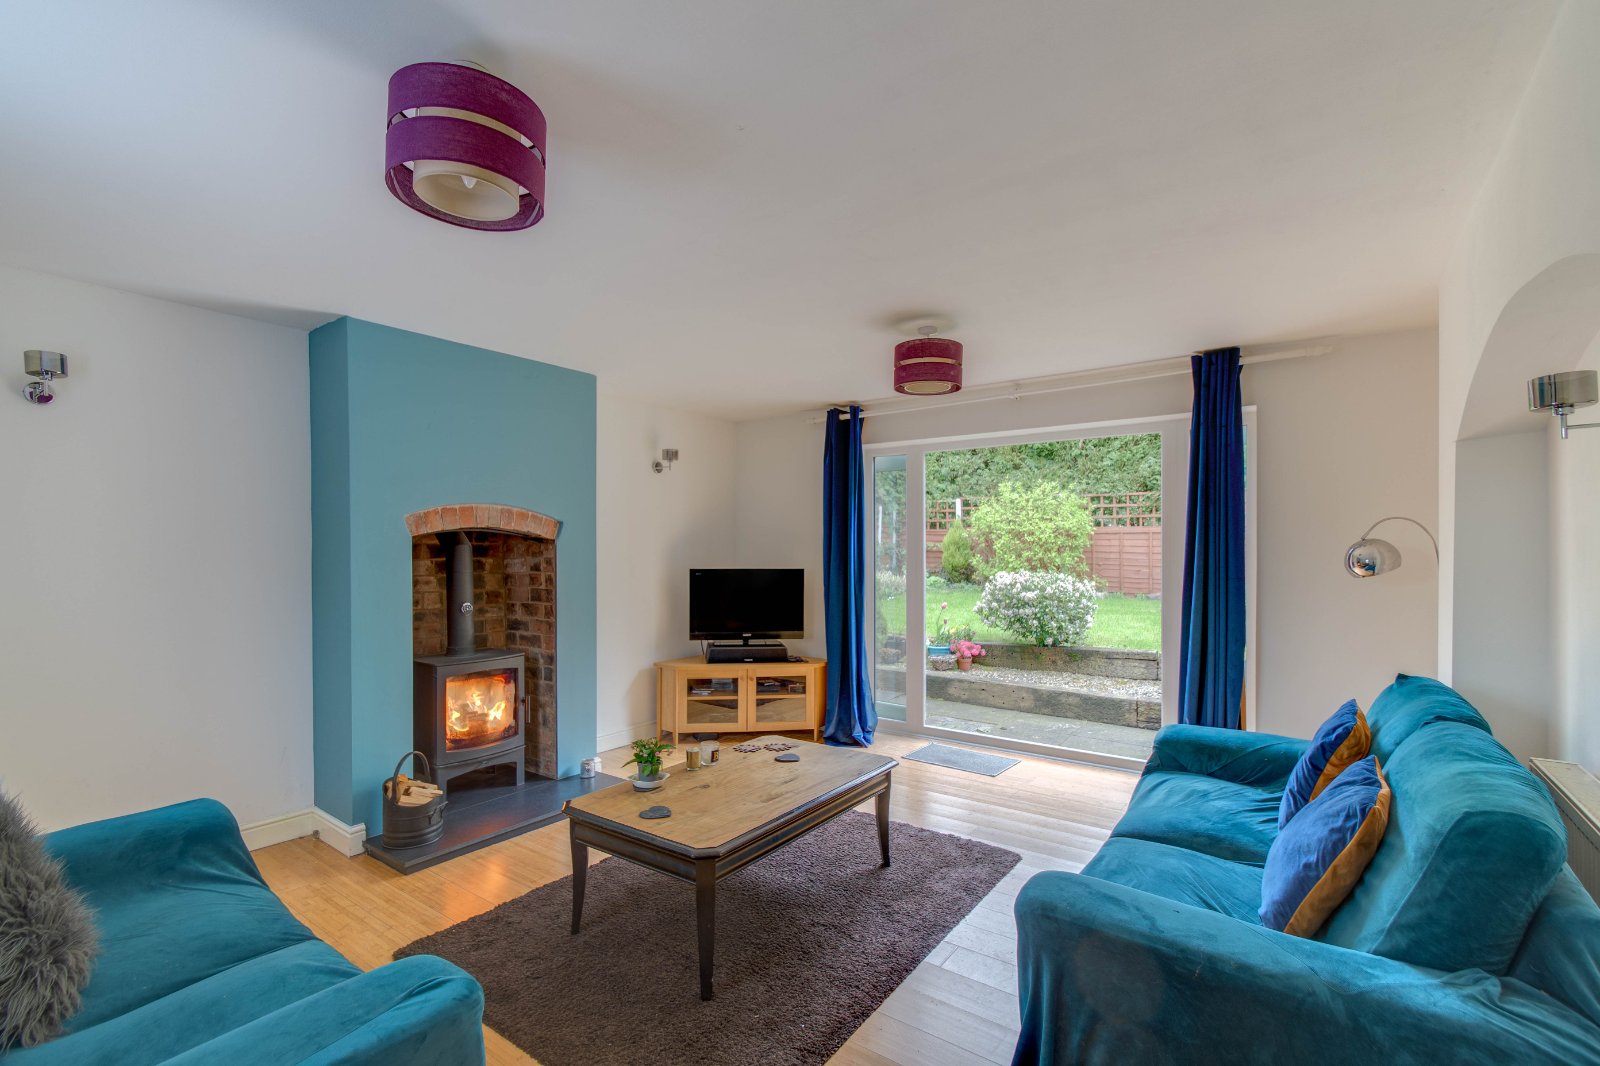 4 bed  for sale in Linthurst Road, Barnt Green  - Property Image 19